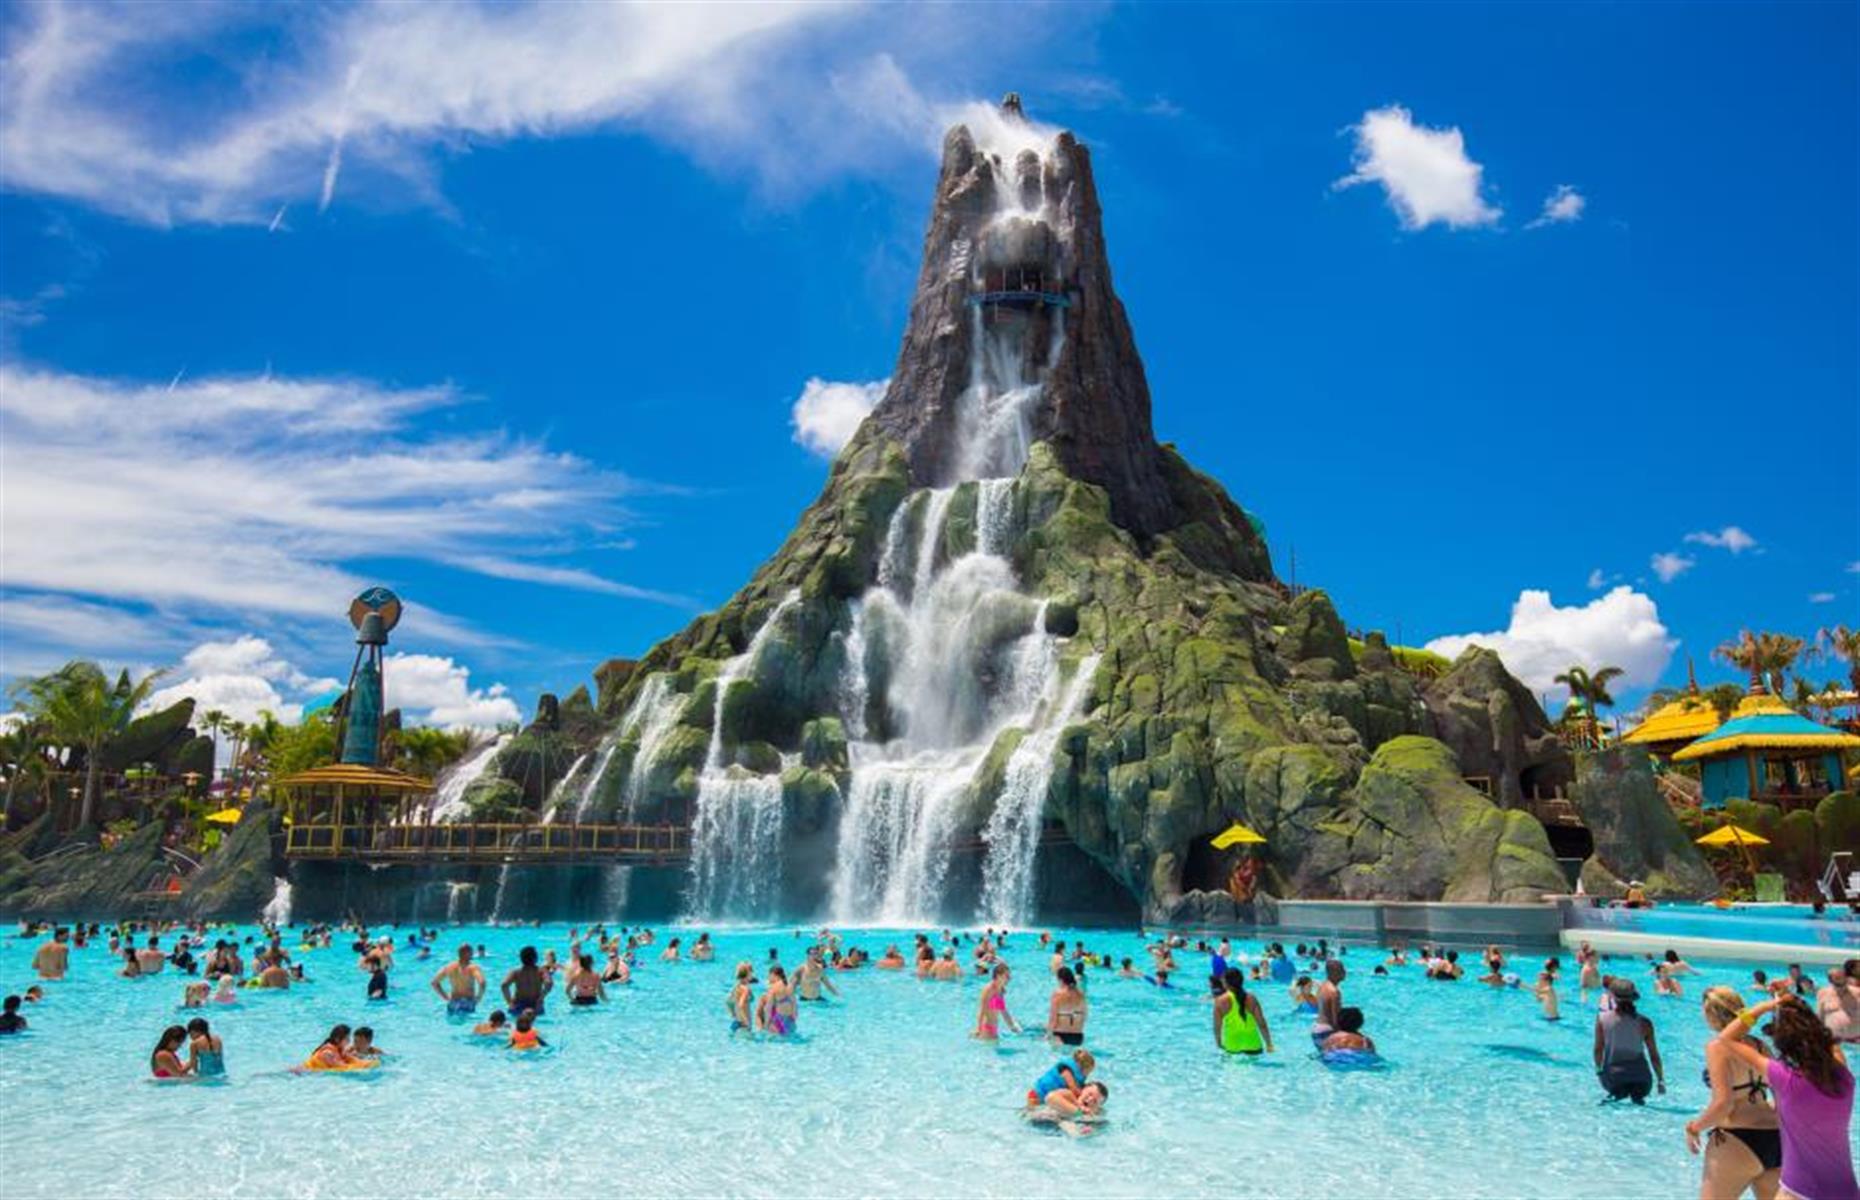 <p>Swim under the mighty Krakatau volcano, explore its trickling waterfalls and enticing lagoons or simply bob about in the waves. <a href="https://www.universalorlando.com/web/en/us/theme-parks/volcano-bay/index.html">Universal Studios' brilliant water park in Orlando</a> is a class act. You can also experience the power of the volcano on a four-person canoe ride that twists and turns deep within the structure before plunging through a waterfall. </p>  <p><a href="http://www.loveexploring.com/galleries/82470/floridas-incredible-transformation-from-swampland-to-holiday-paradise?page=1"><strong>Now check out Florida's incredible transformation from swampland to holiday paradise</strong></a></p>